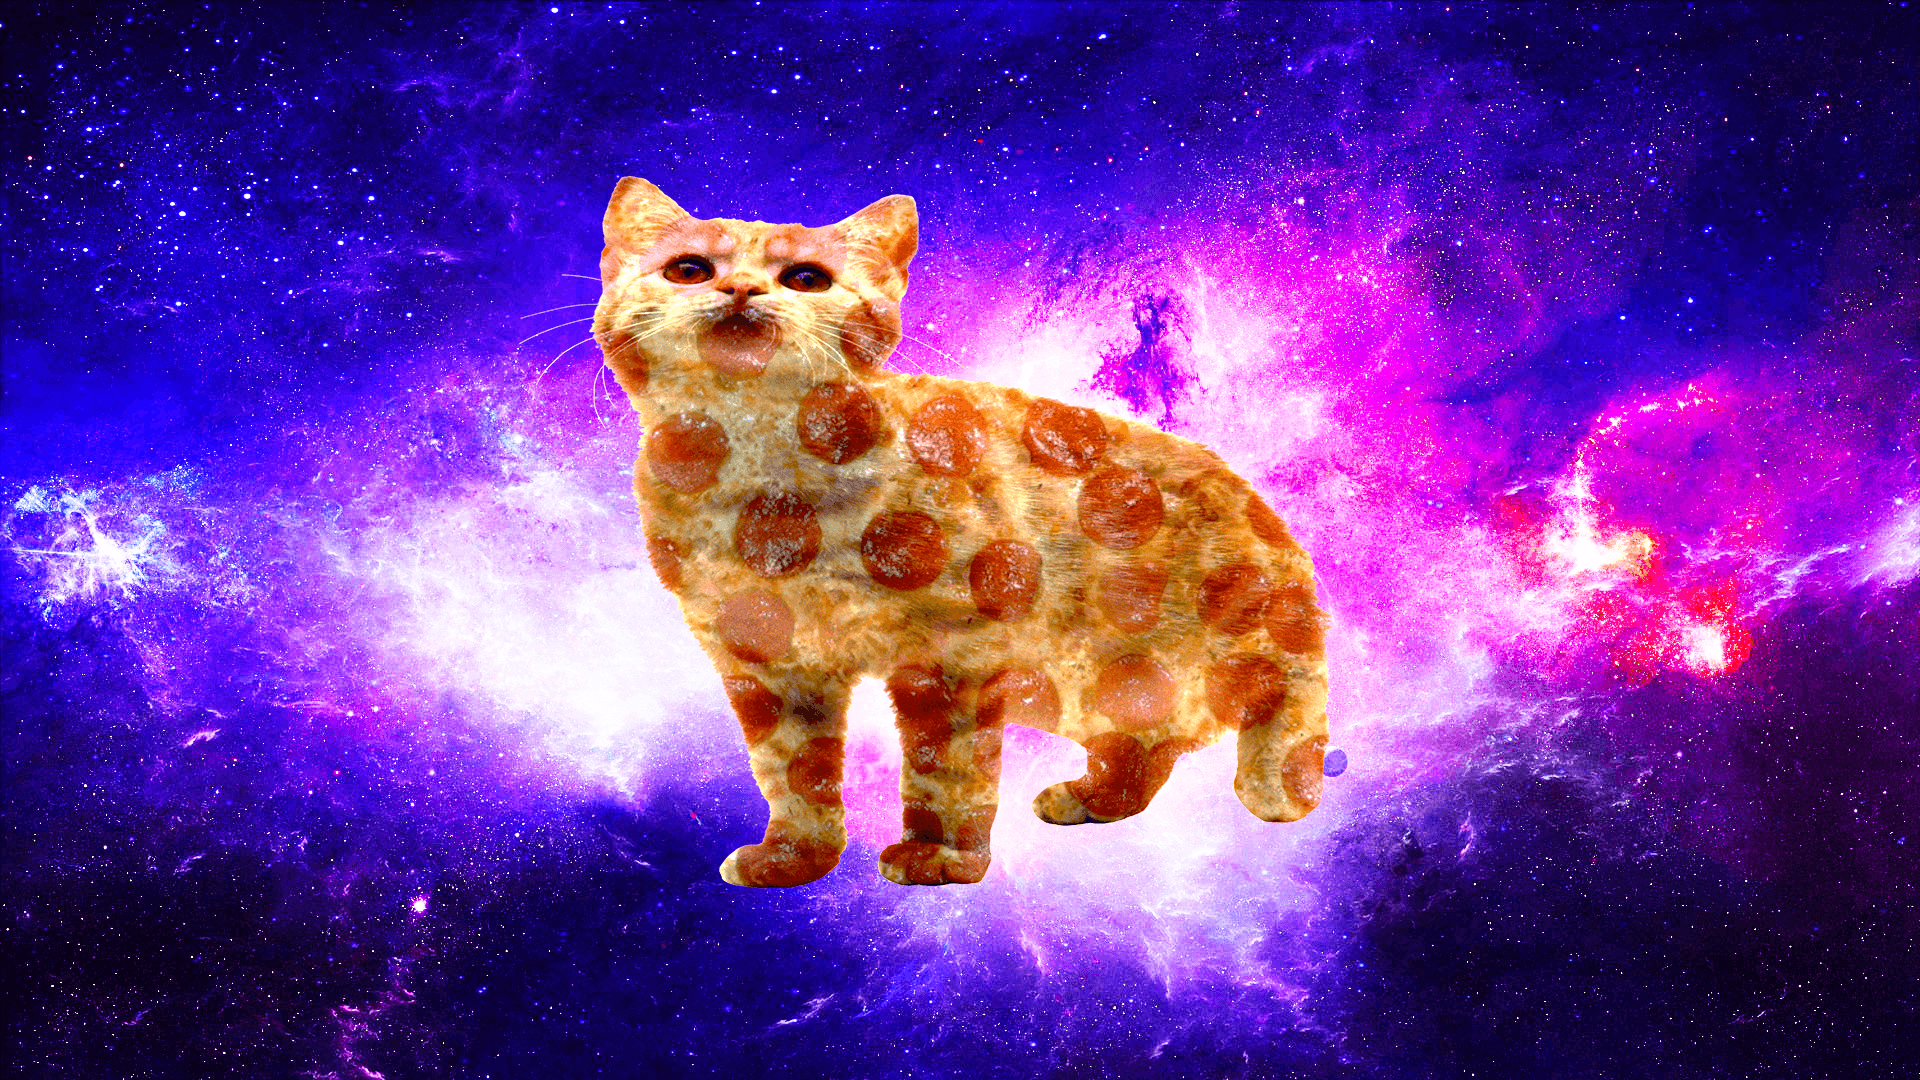  Cats in Space Wallpapers Top Free Cats in Space 